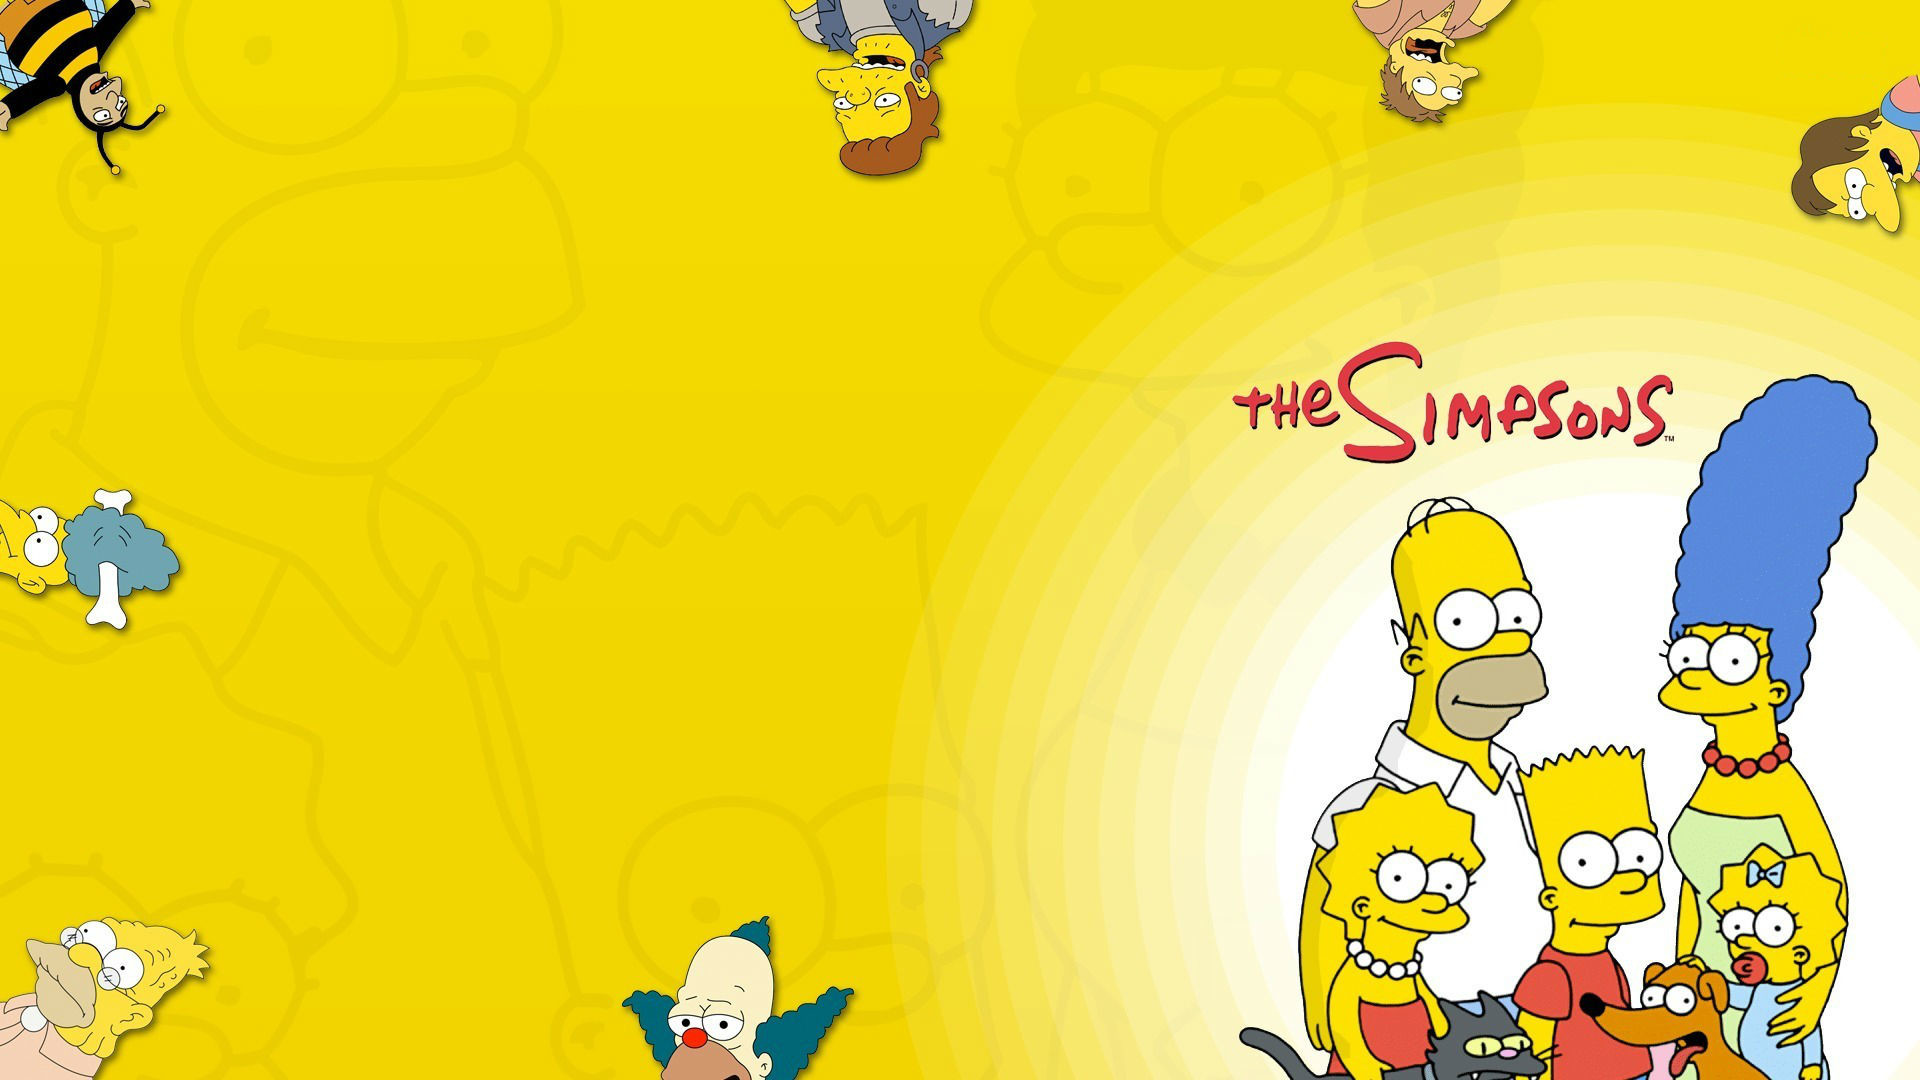 1920x1080 The Simpsons wallpaper 9